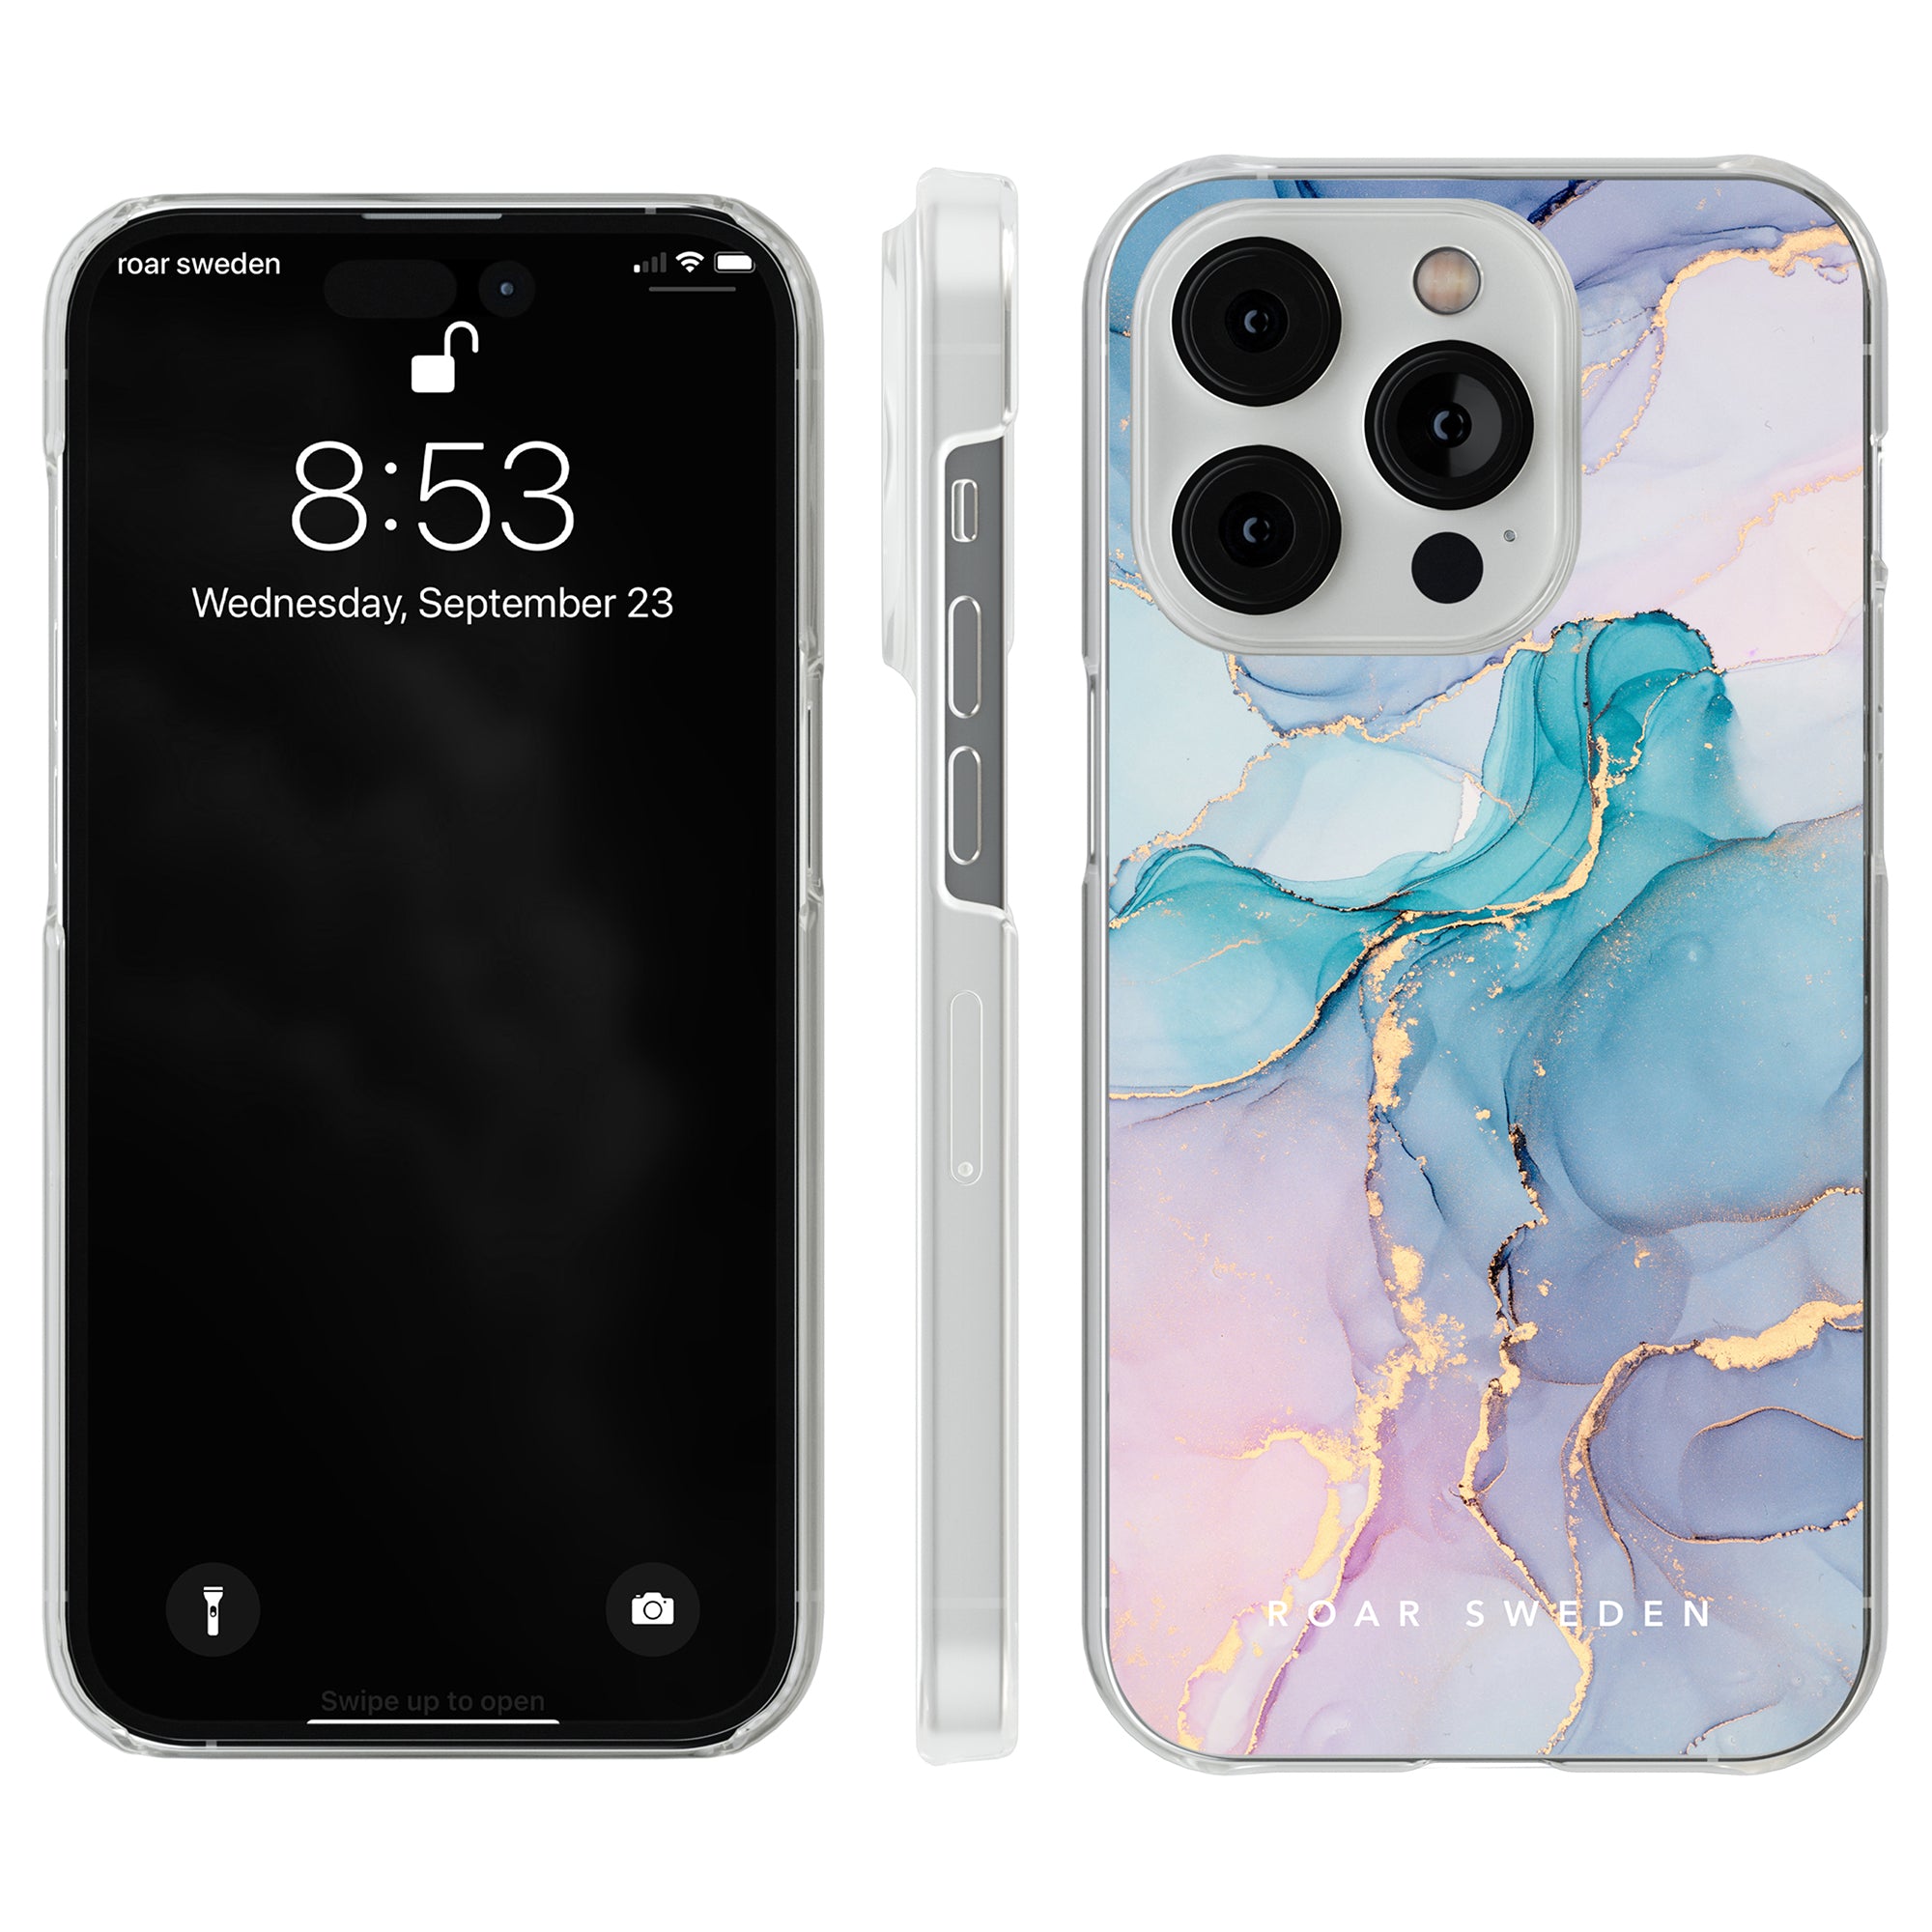 A Swirl - Clear Case with a marble pattern, suitable for Skal users.